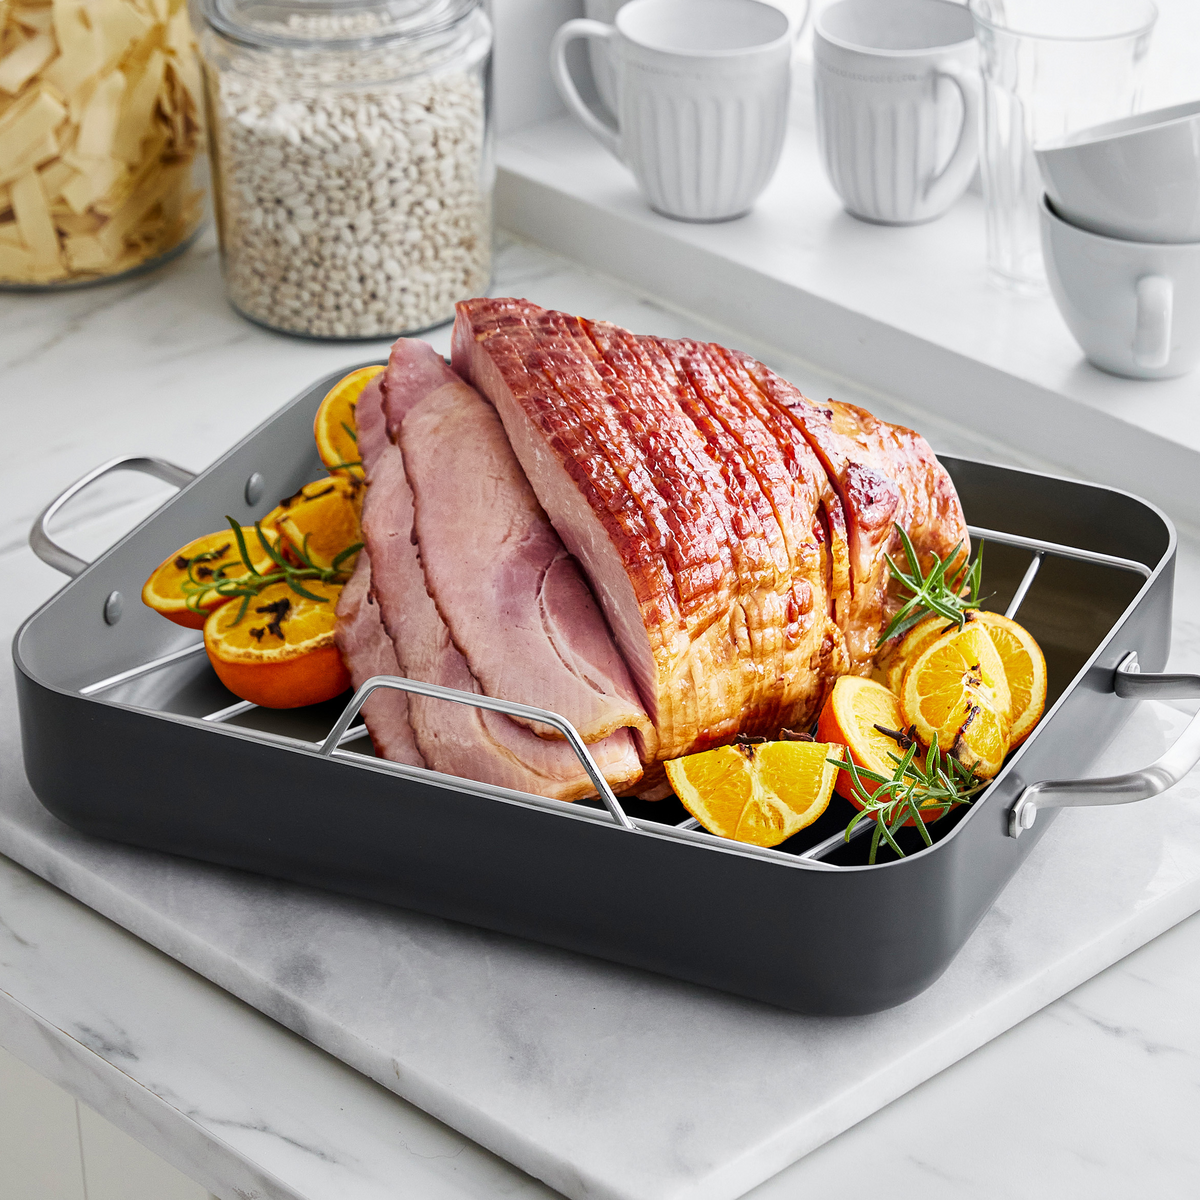 Extra Large Reinforced Commercial Roasting Pan